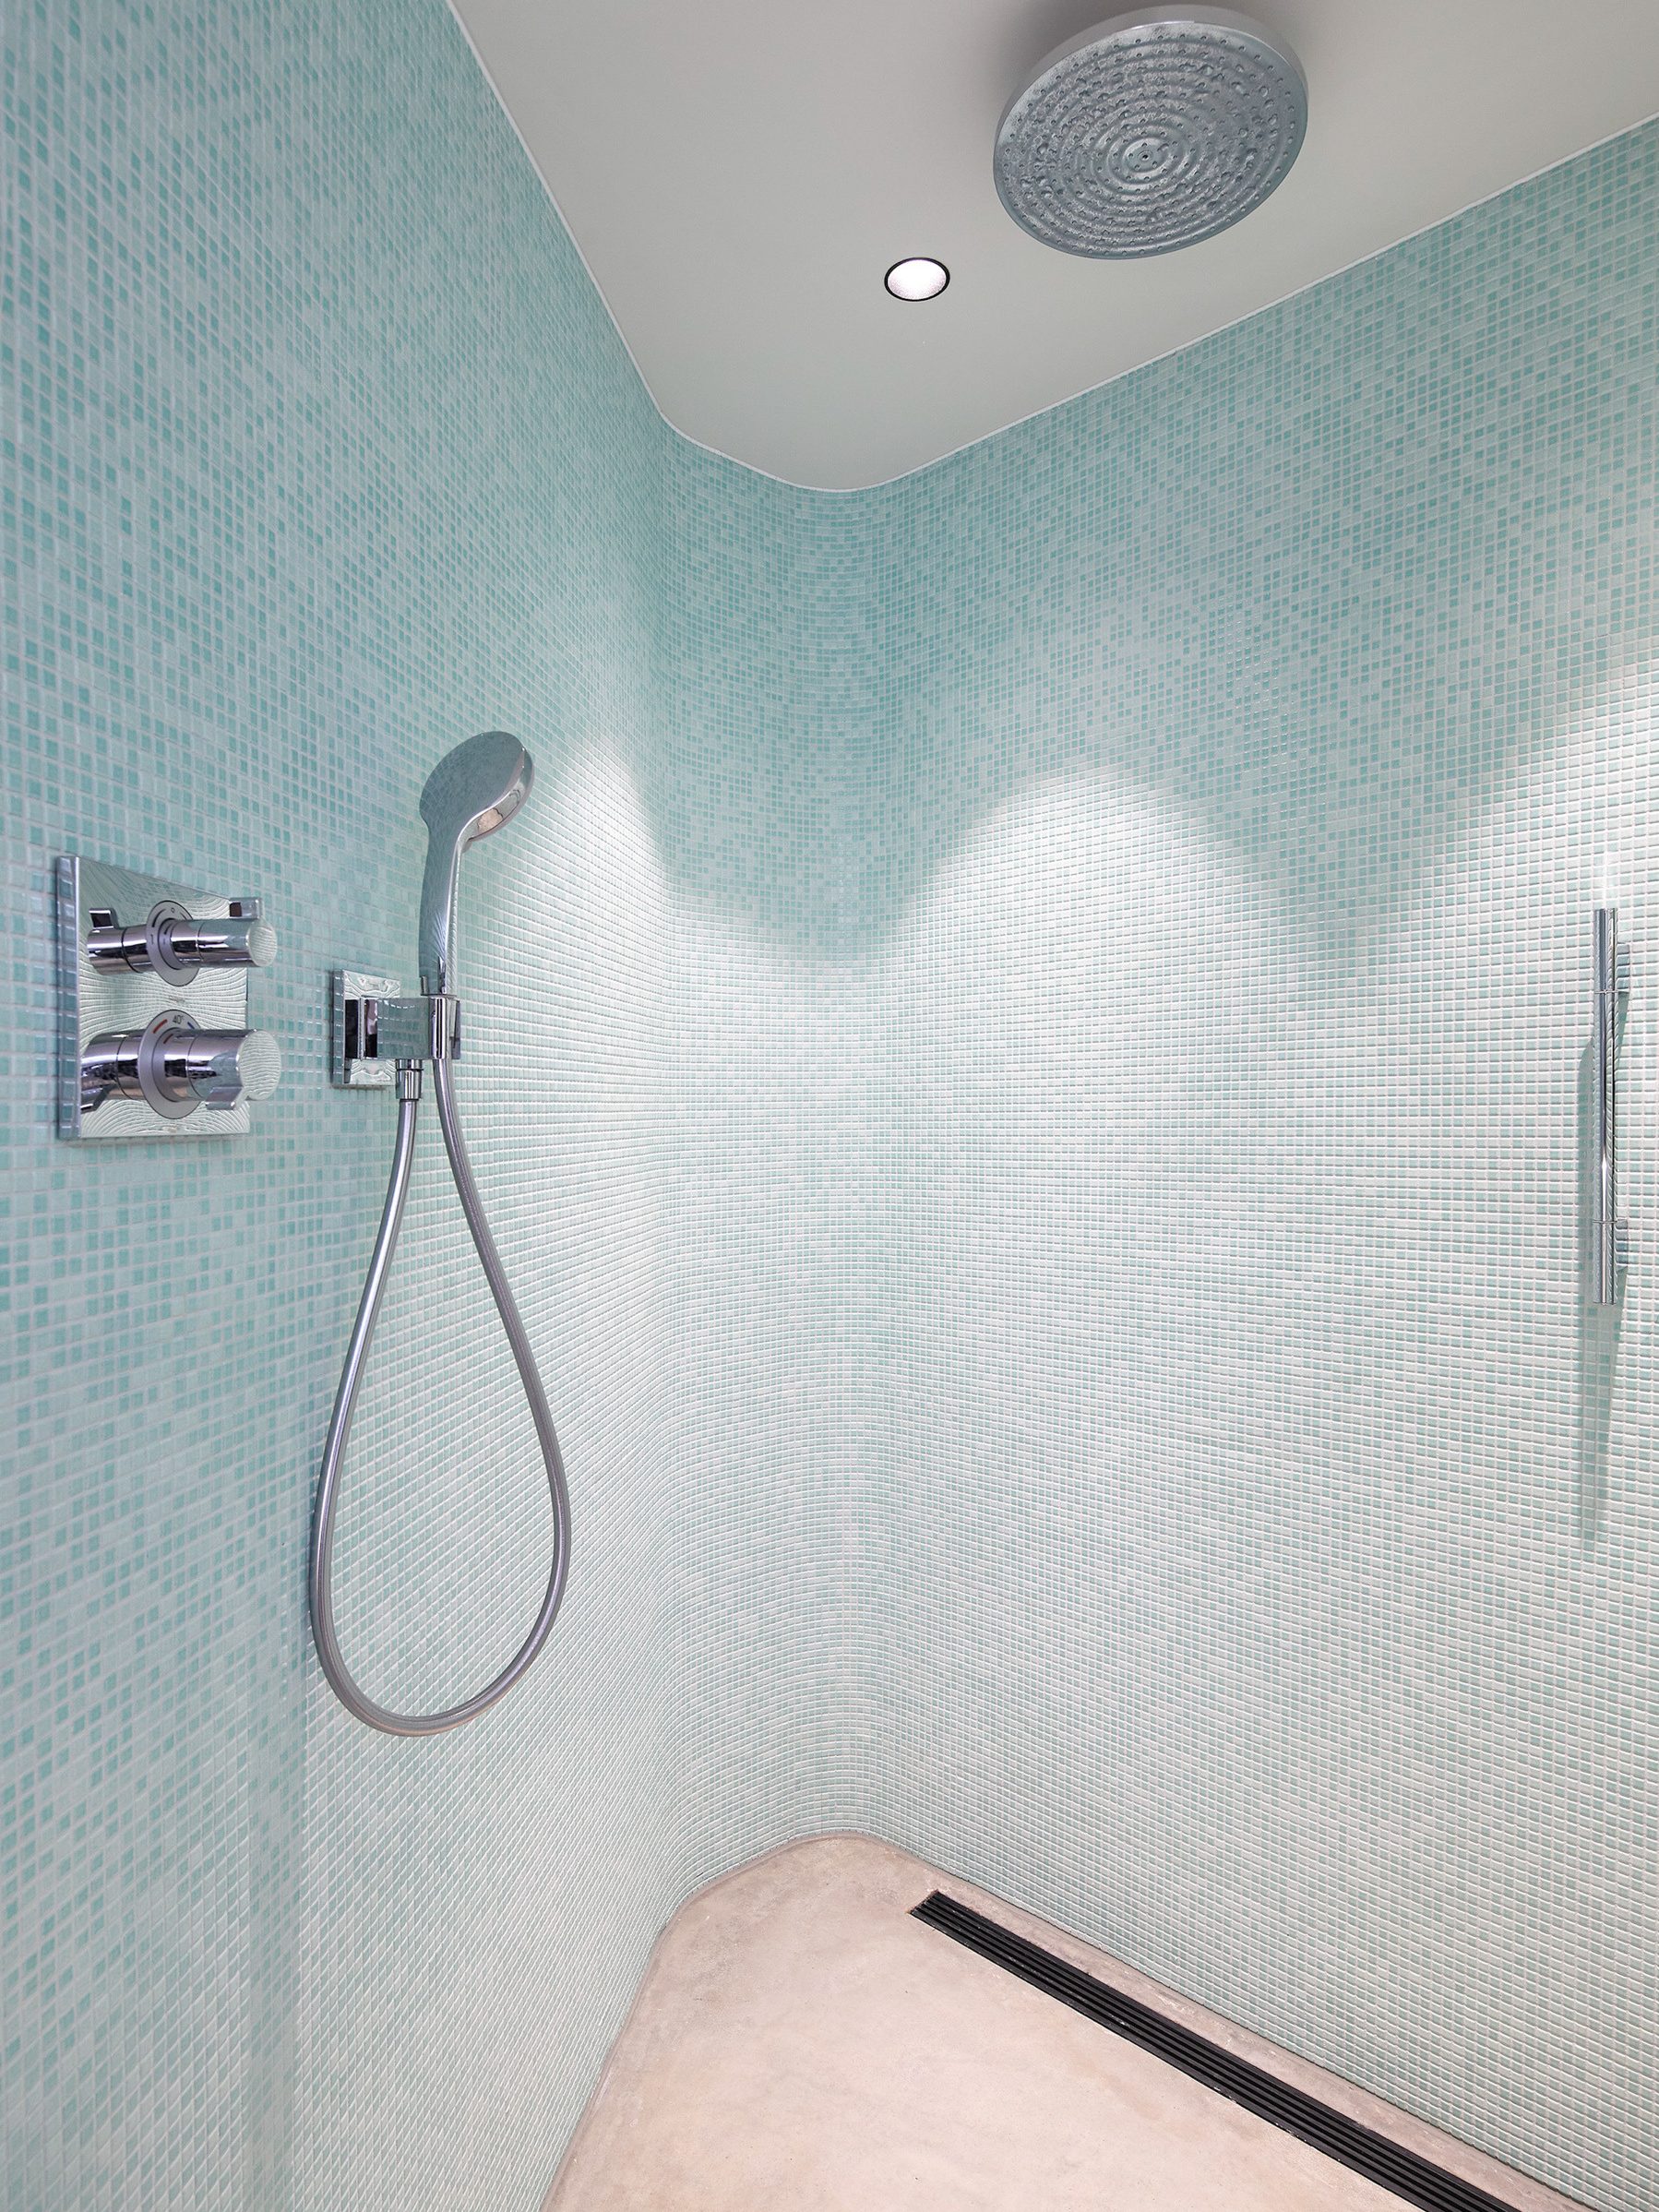 Curved tiled shower wall in house | cdc studio cambridge architects